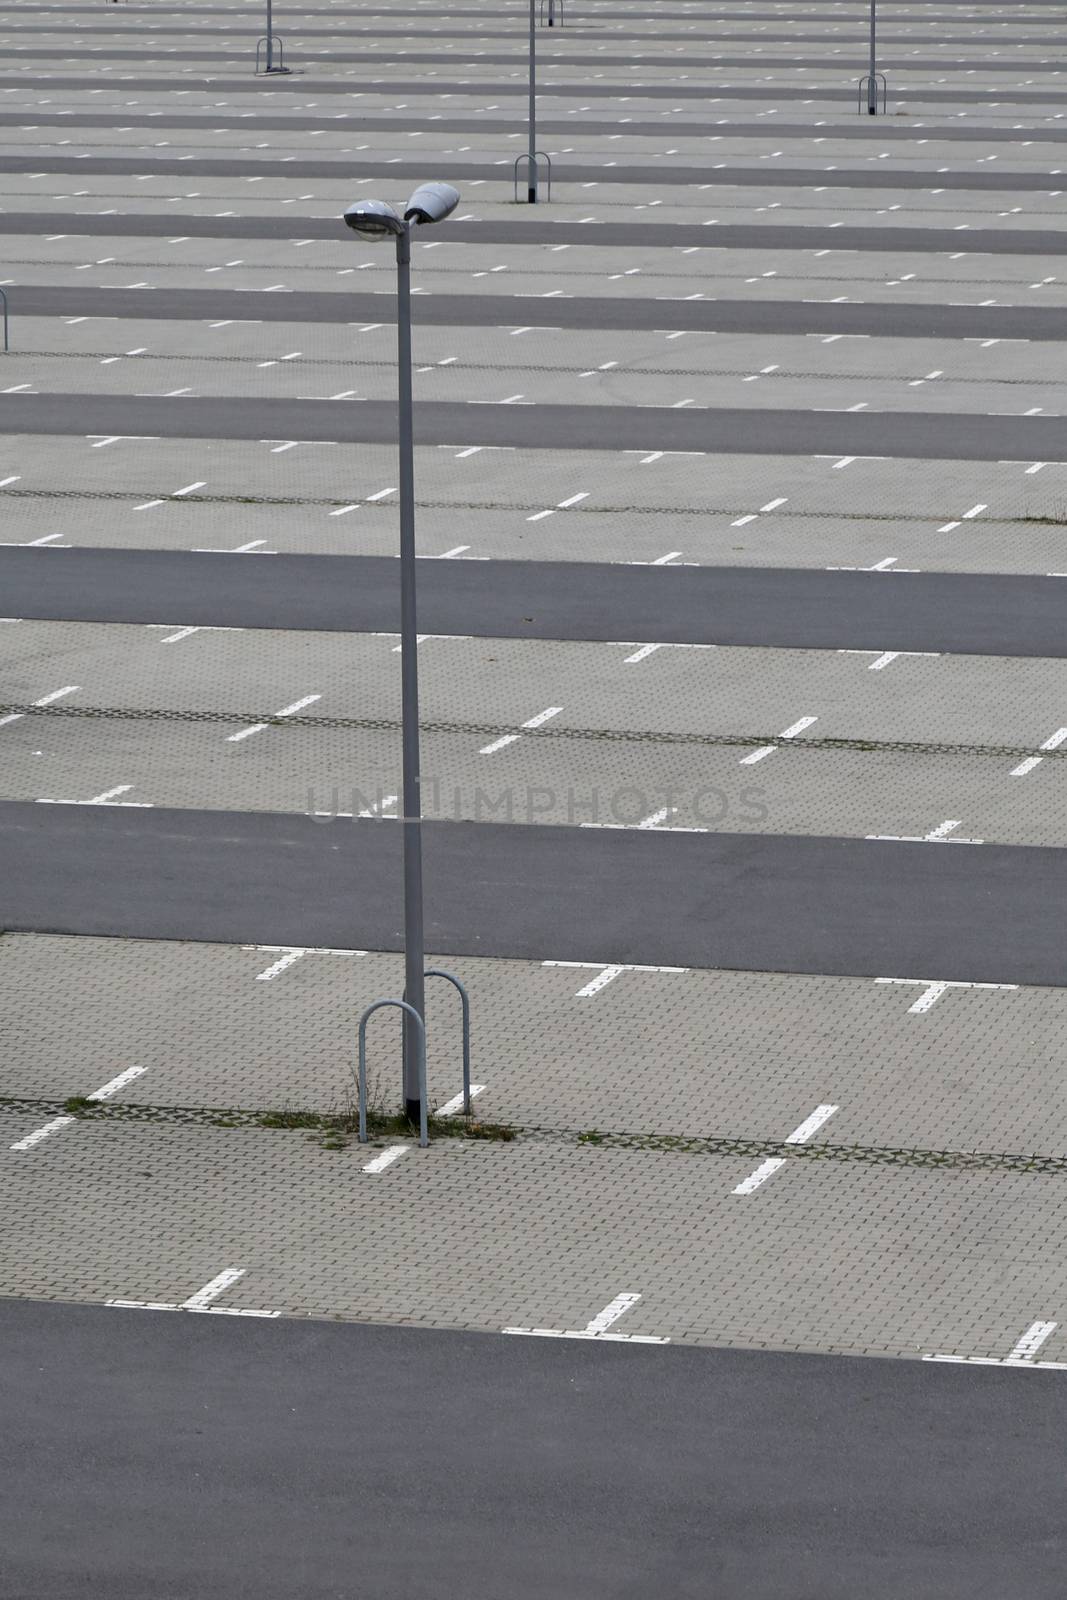 Outdoor empty parking space seen from above